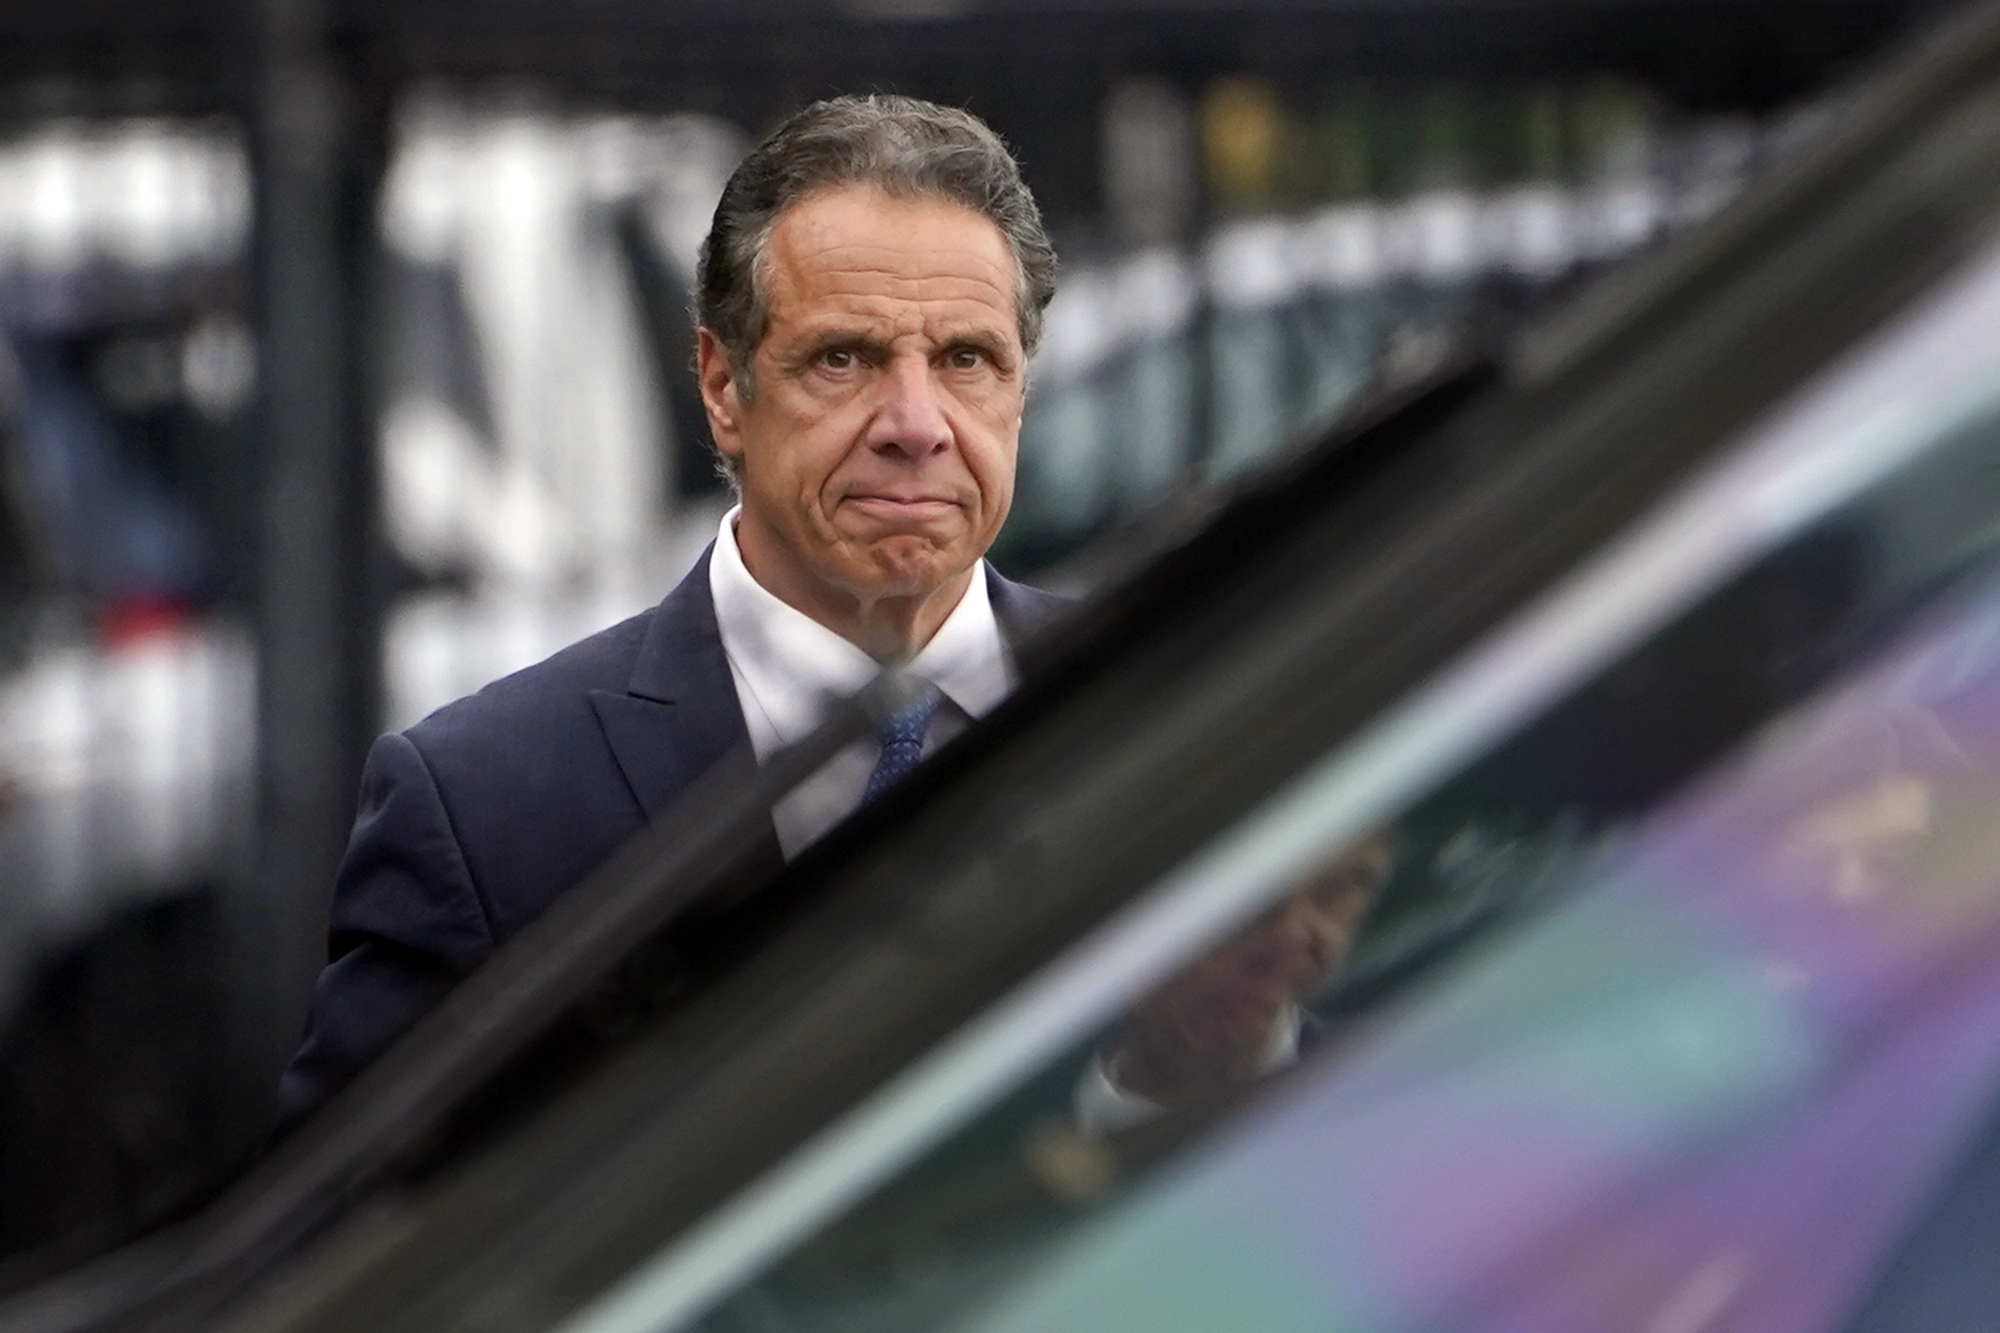 New Yorks ehemaliger Gouverneur Andrew Cuomo